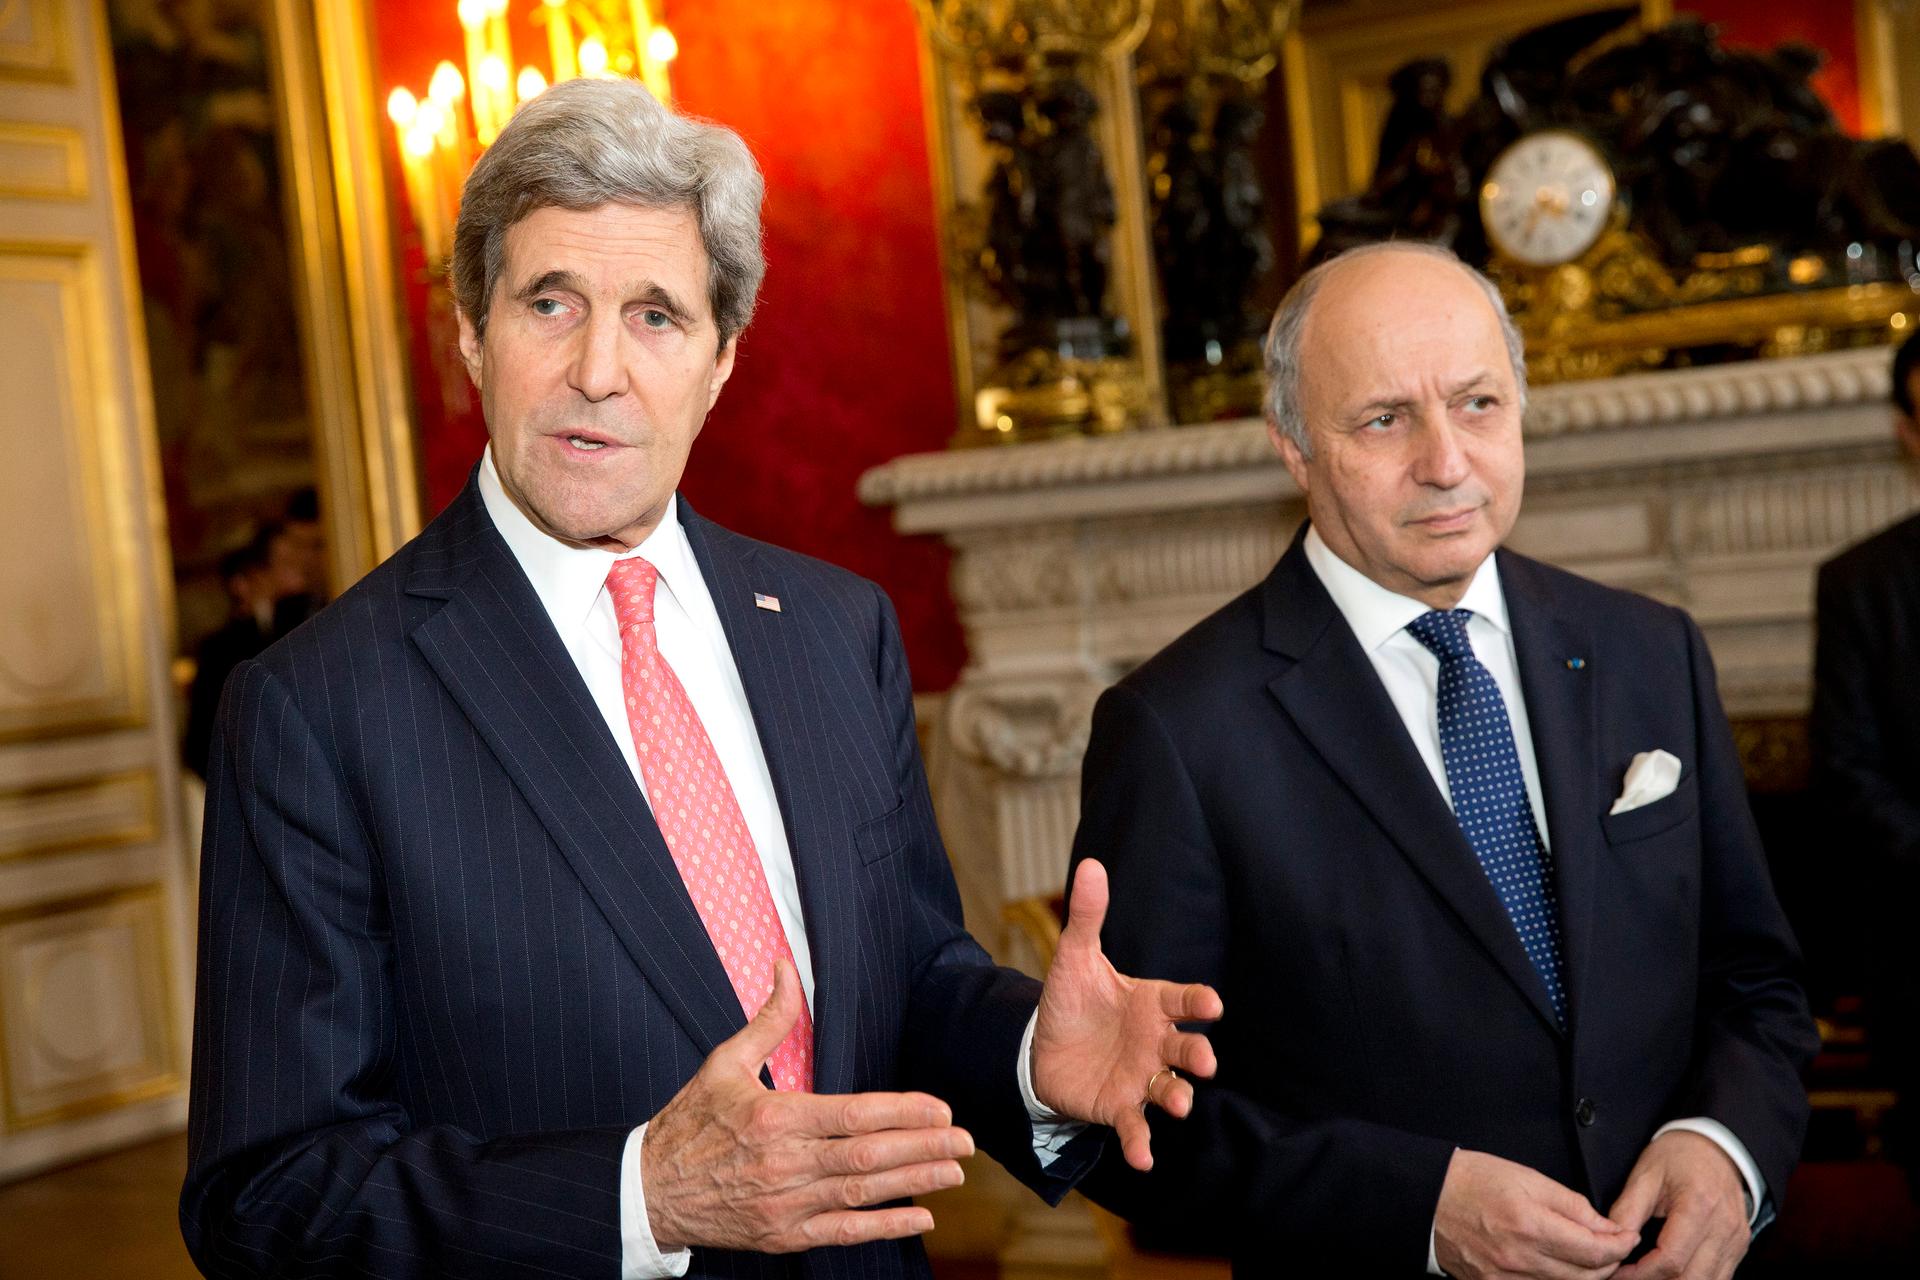 U.S. Secretary of State John Kerry (left) gestures during a statement on the violence in Ukraine before a meeting with French Foreign Minister Laurent Fabius in Paris February 19, 2014.